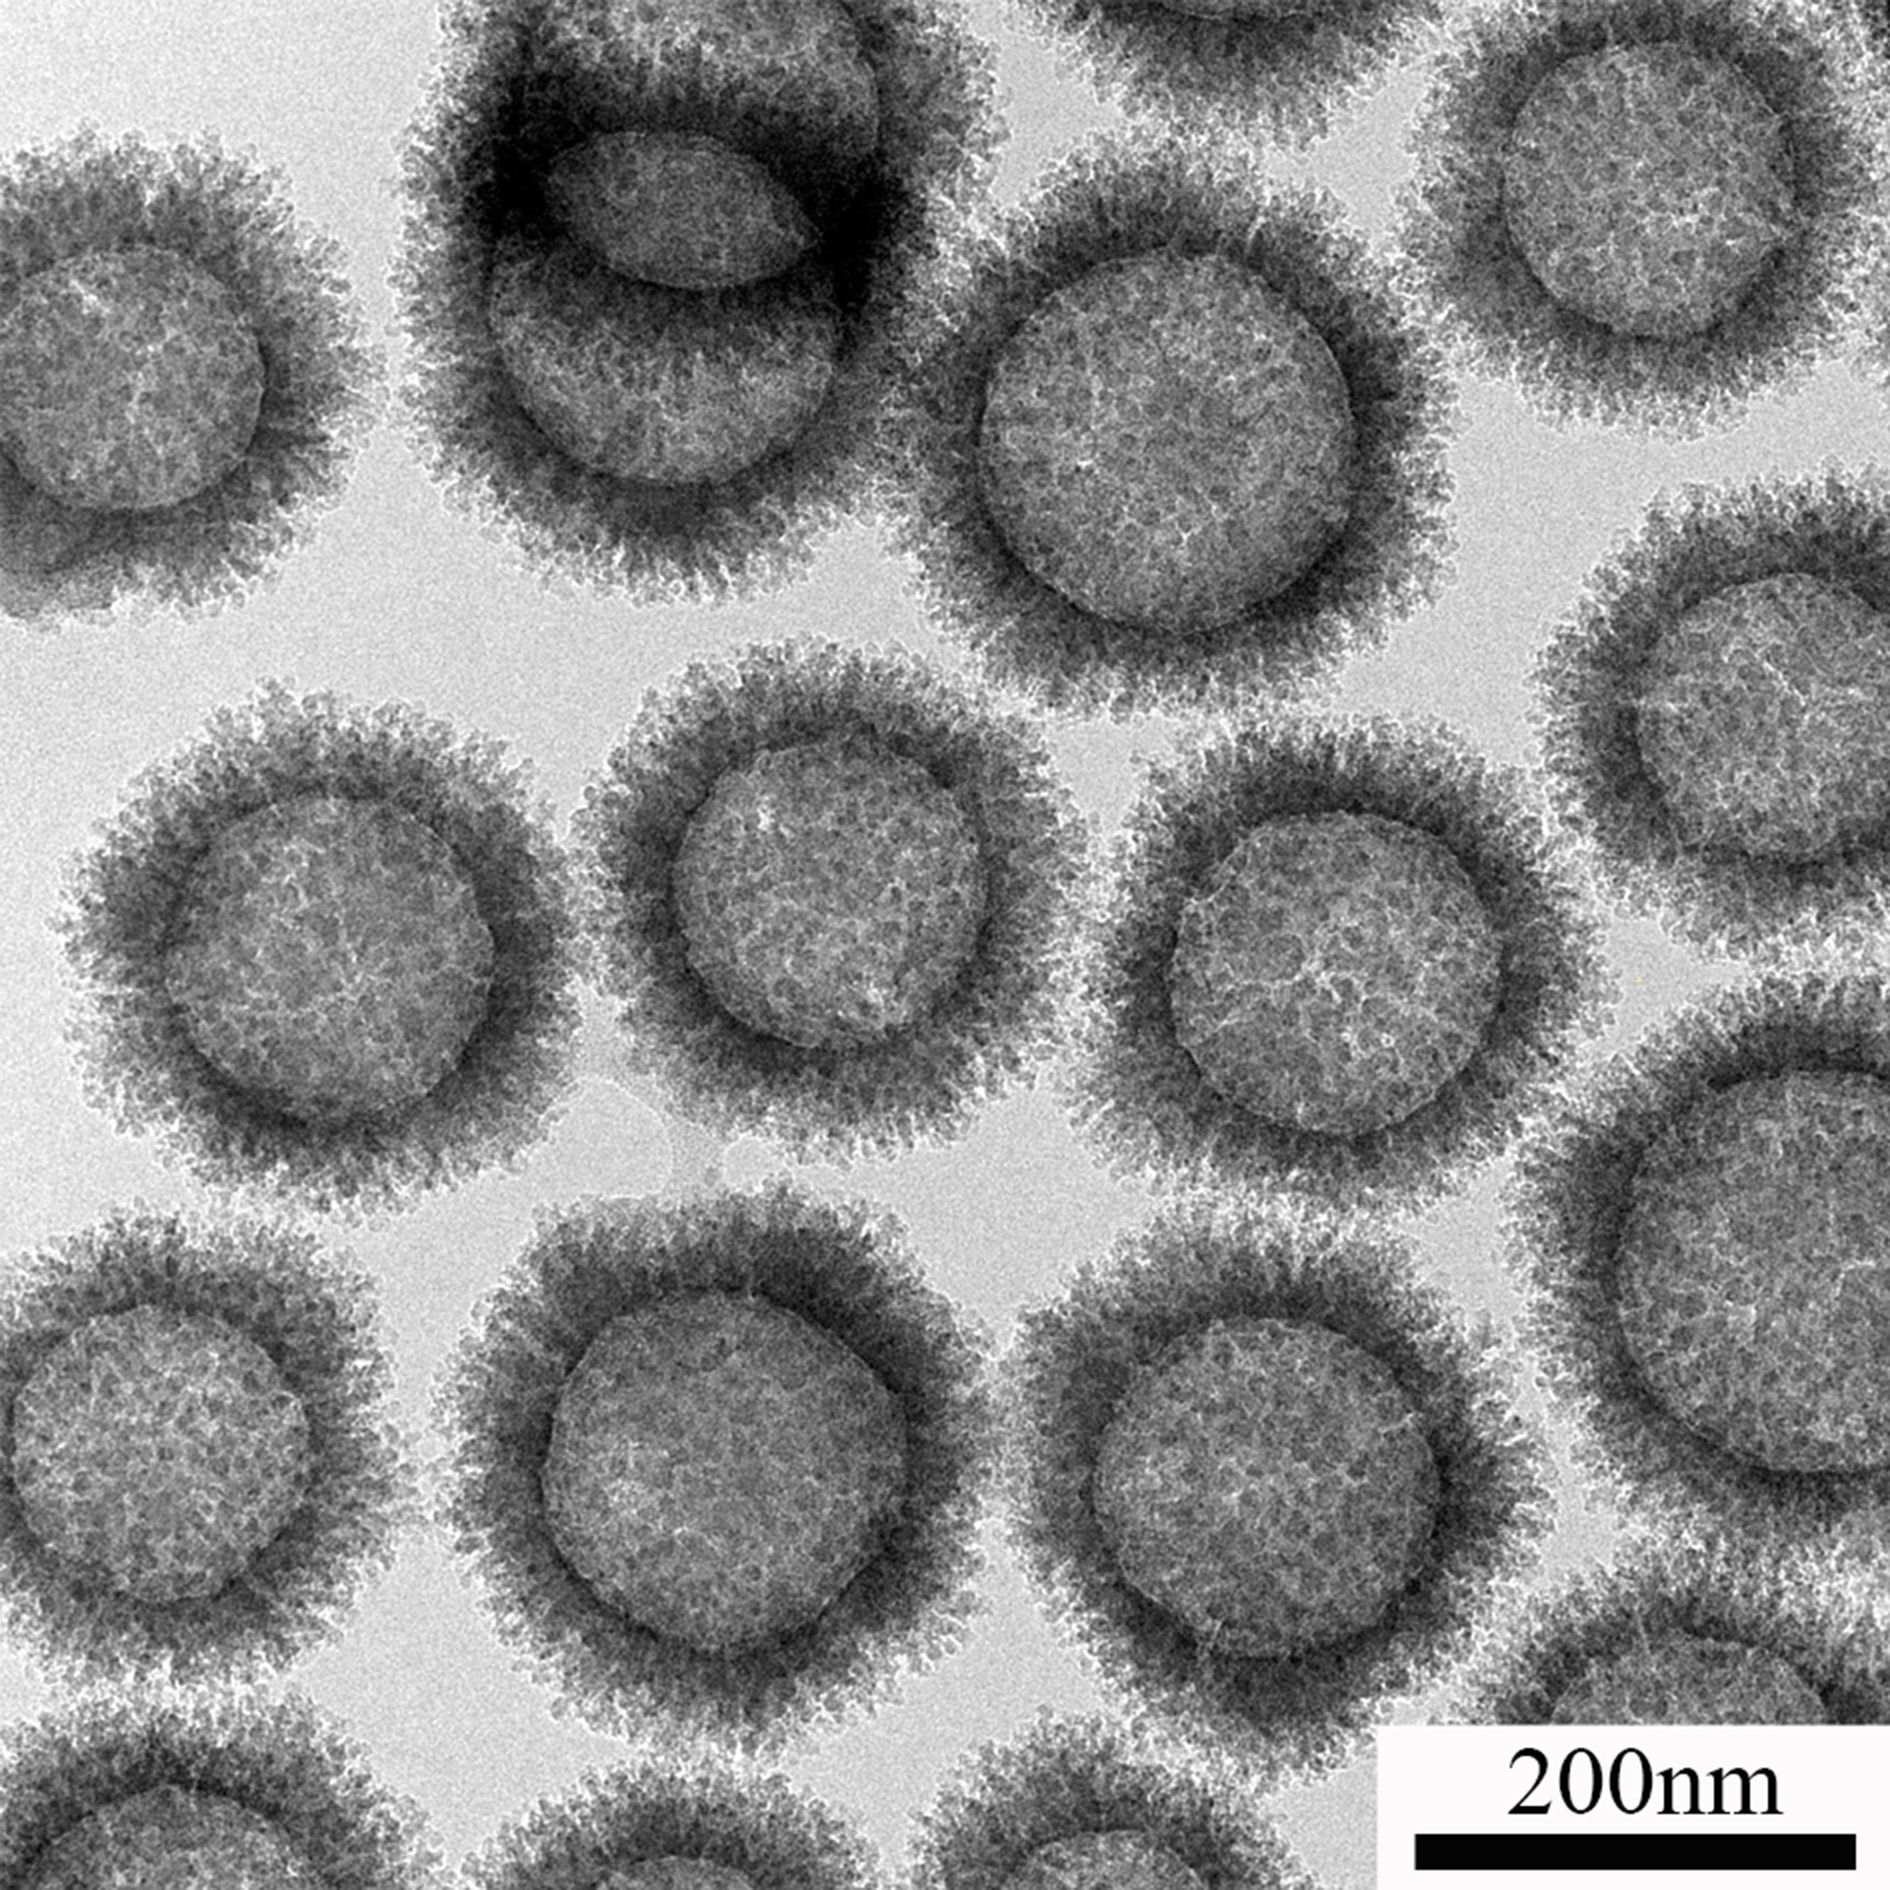 Spikey Nanoparticles developed by AIBN researcher Professor Michael Yu